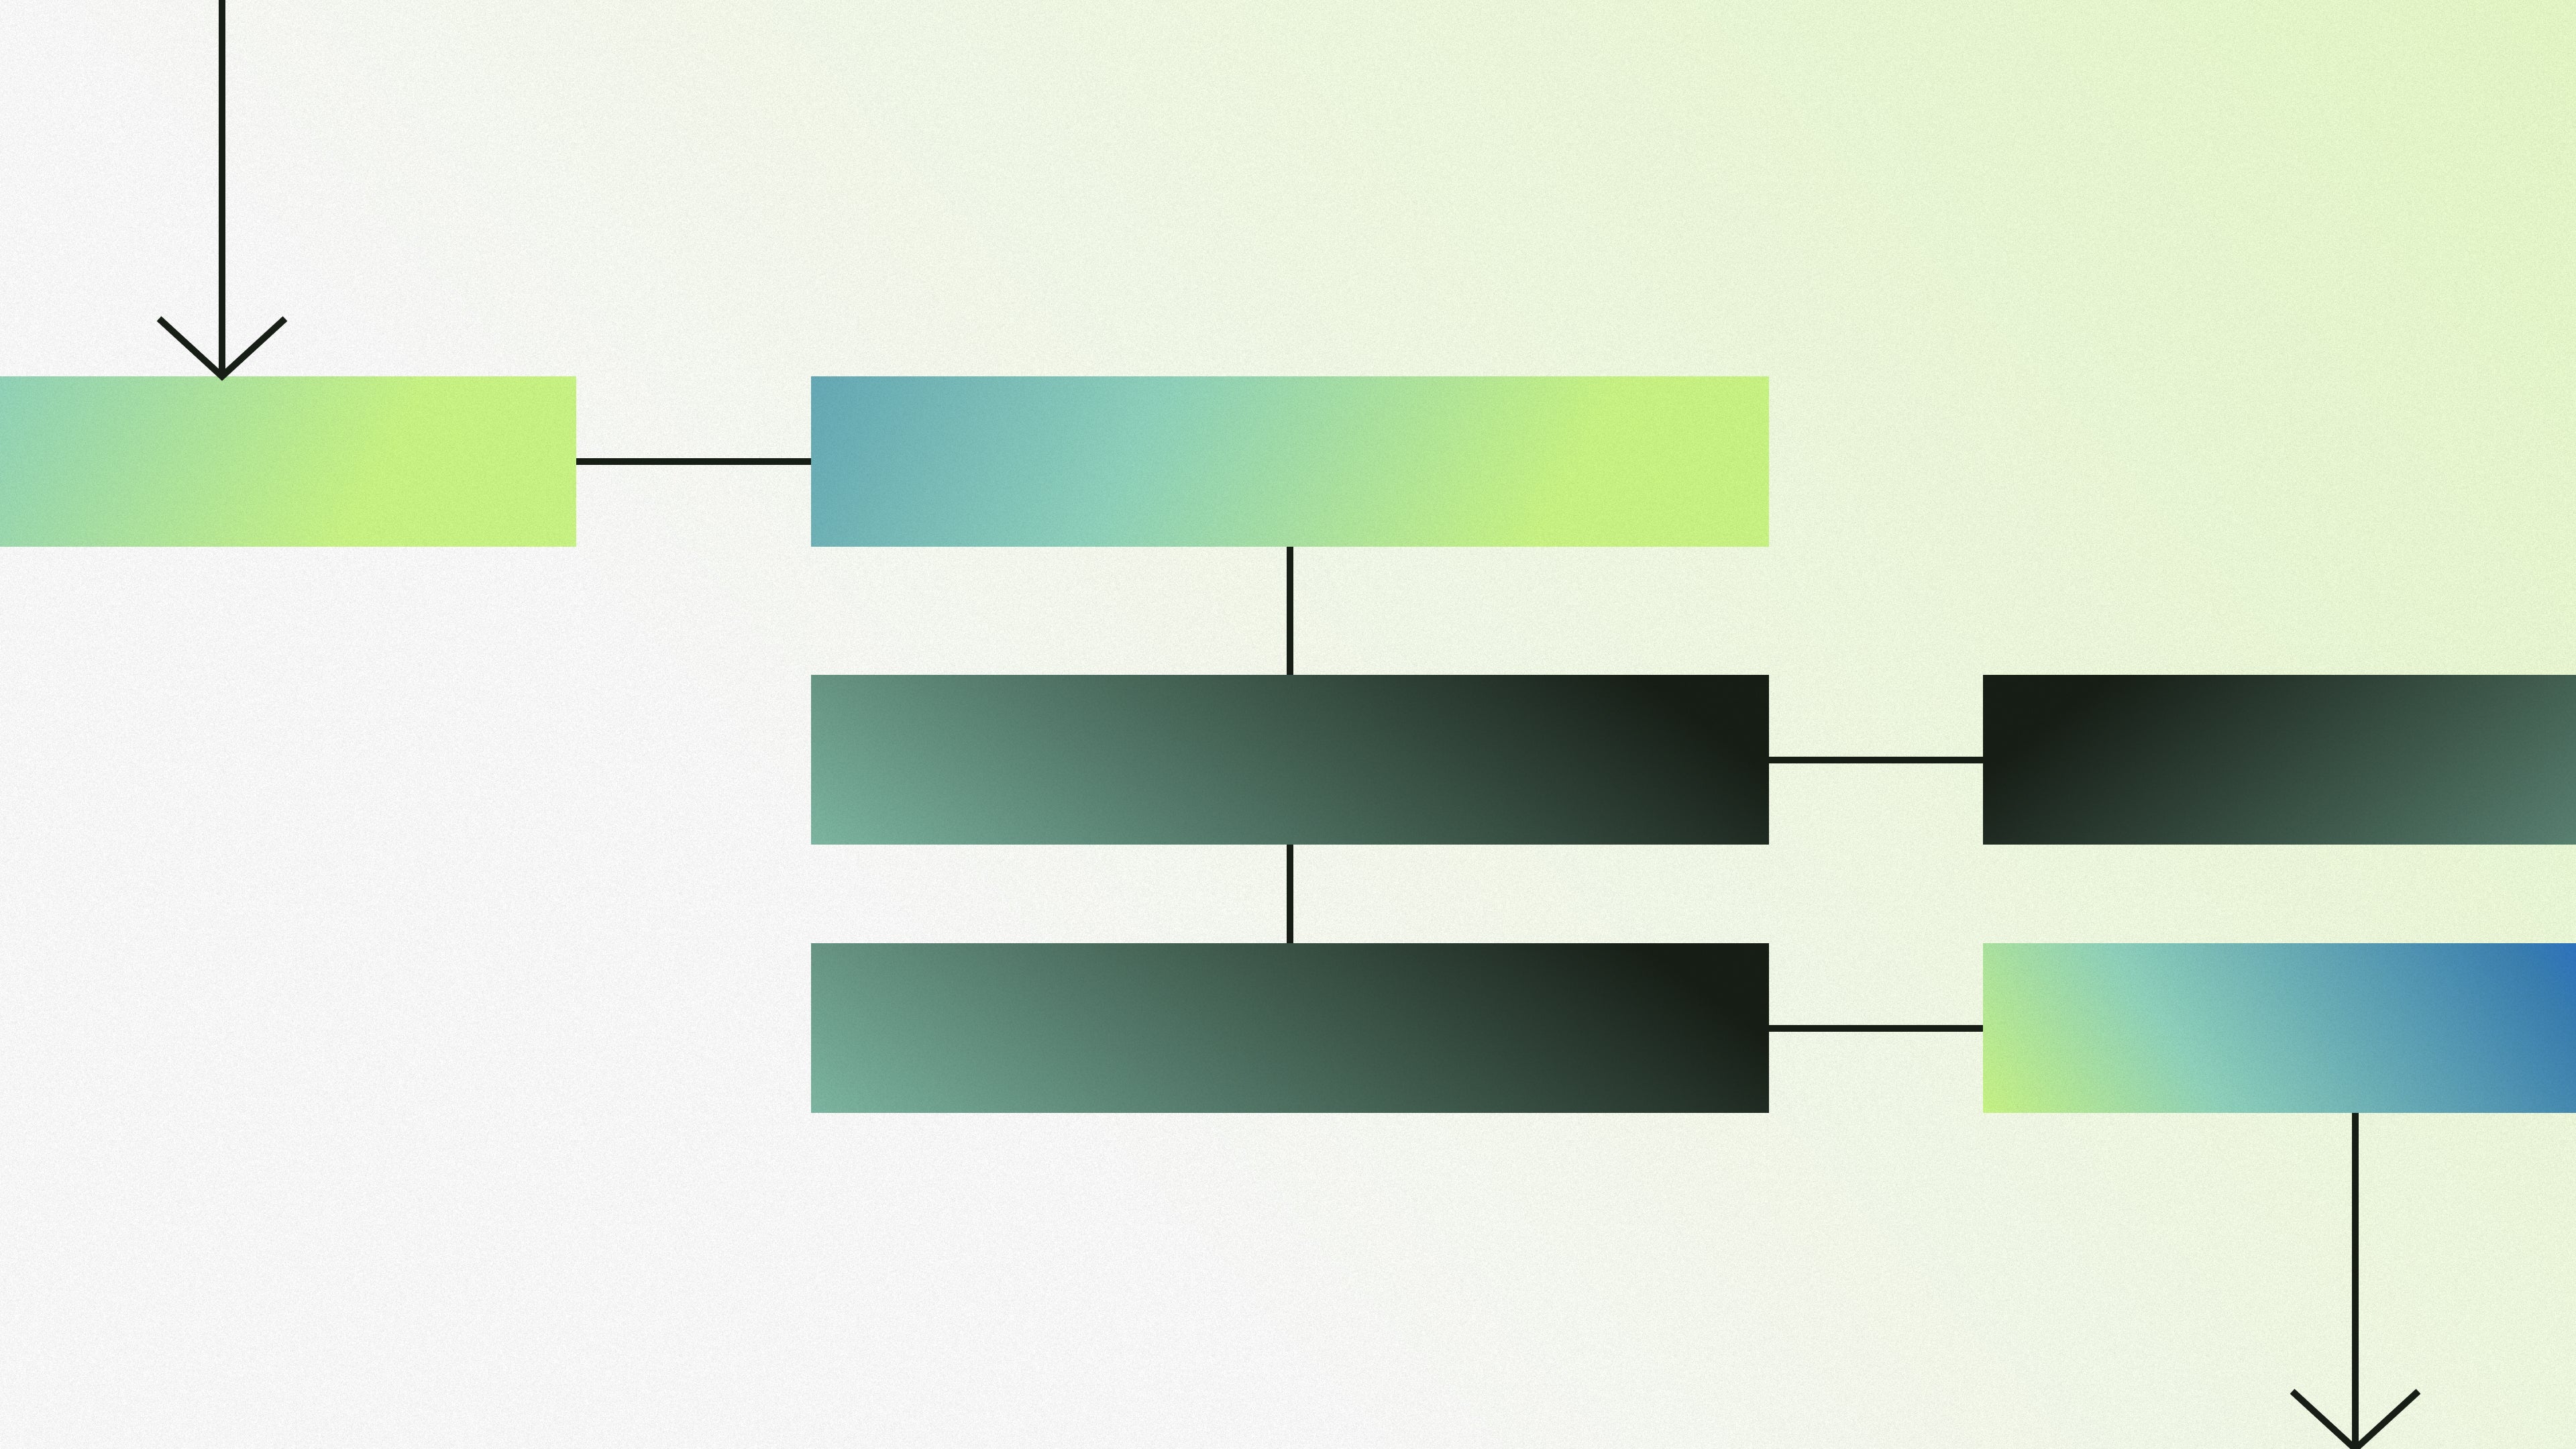 Abstract flowchart with colorful gradient bars connected by lines on a light background.